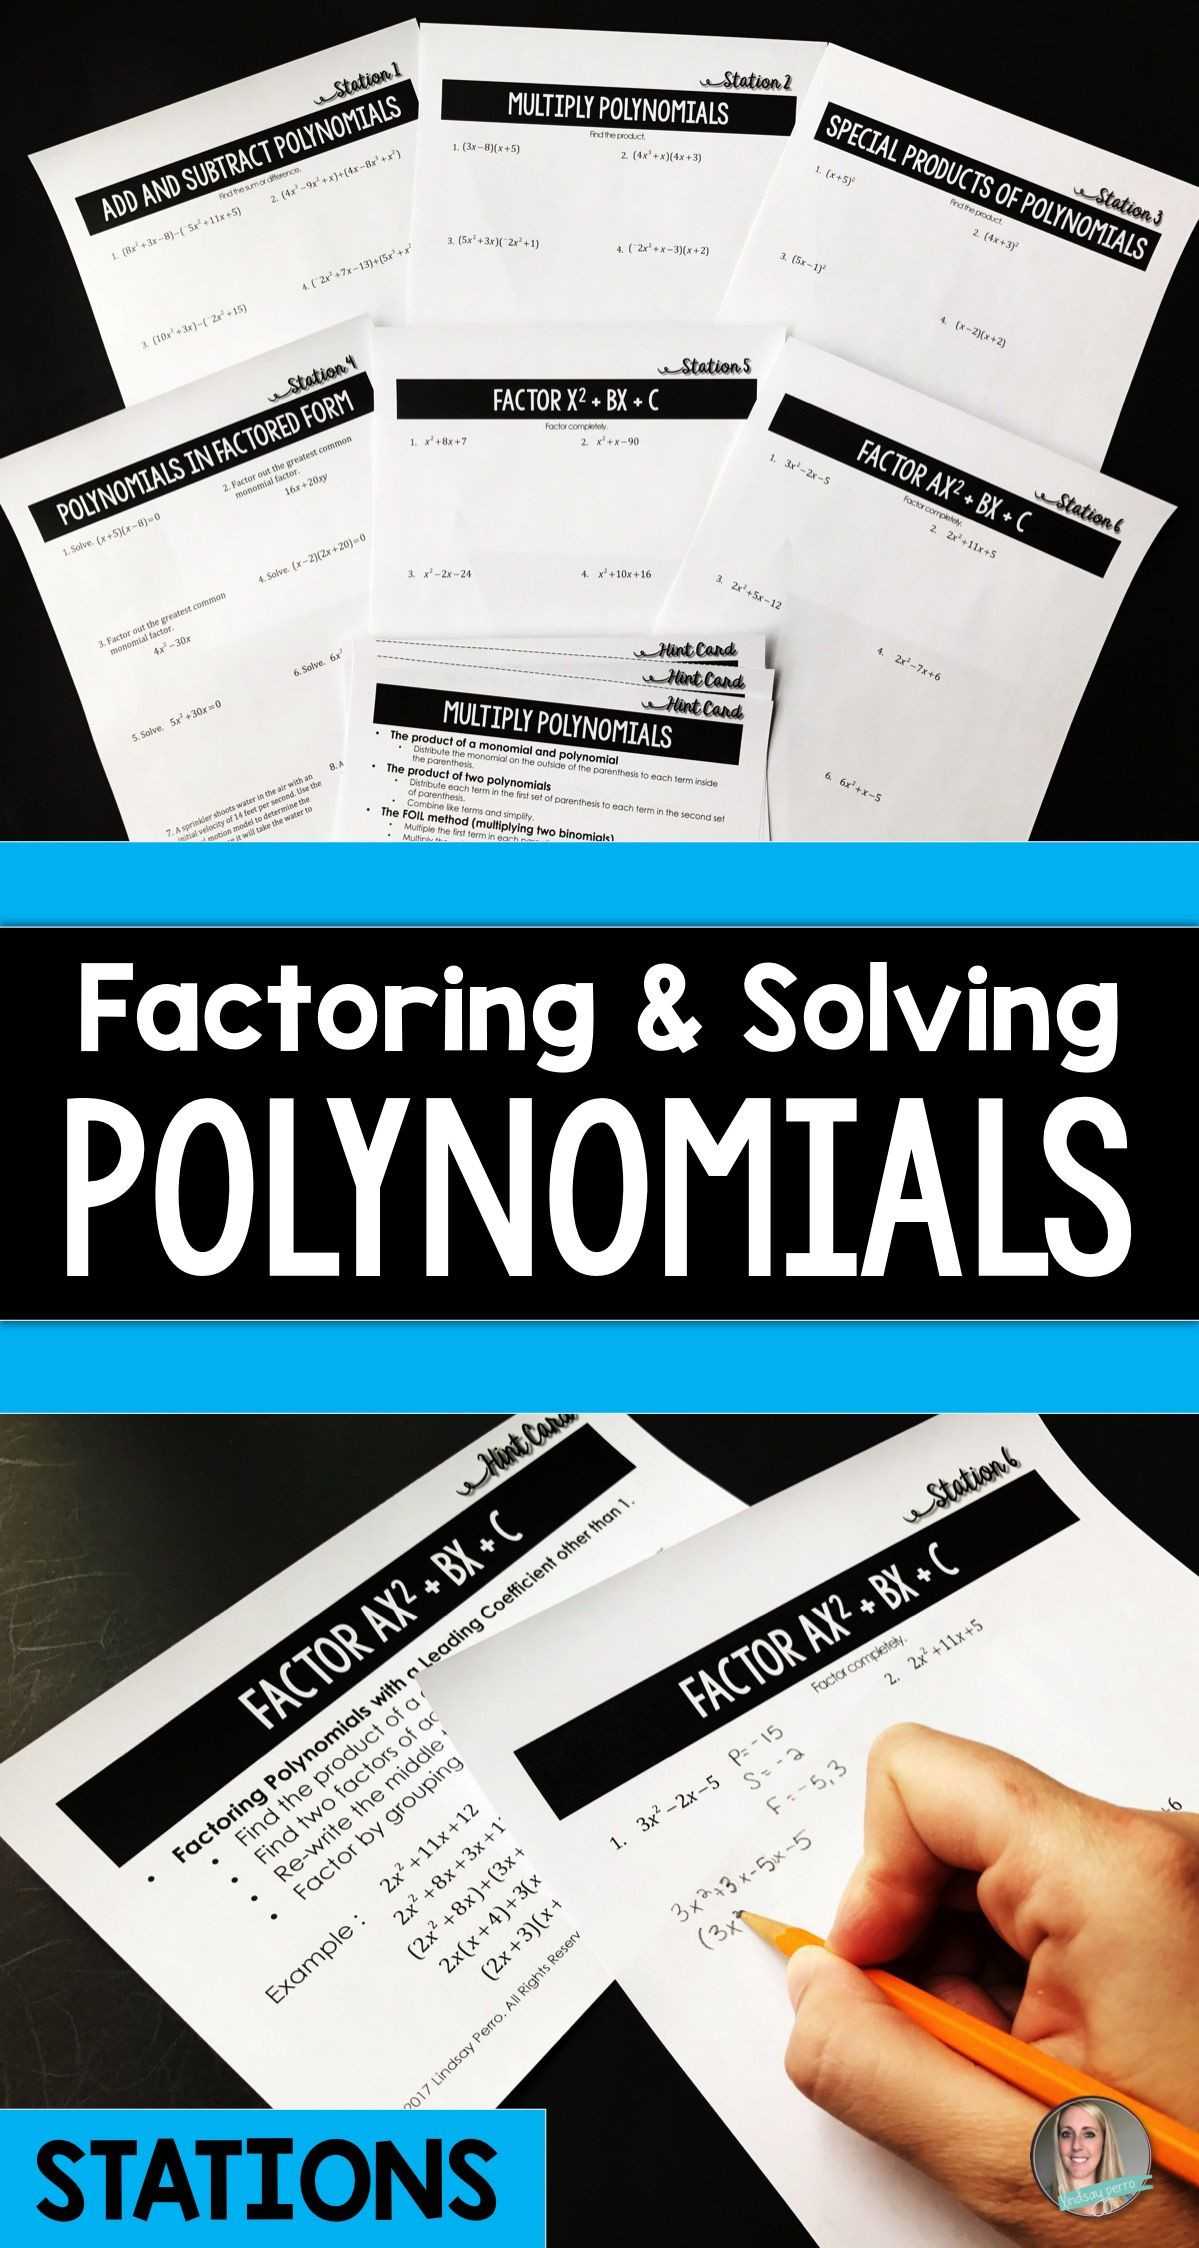 Algebra 1 Factoring Worksheet Also solving Polynomial Equations by Factoring Worksheet with Answers